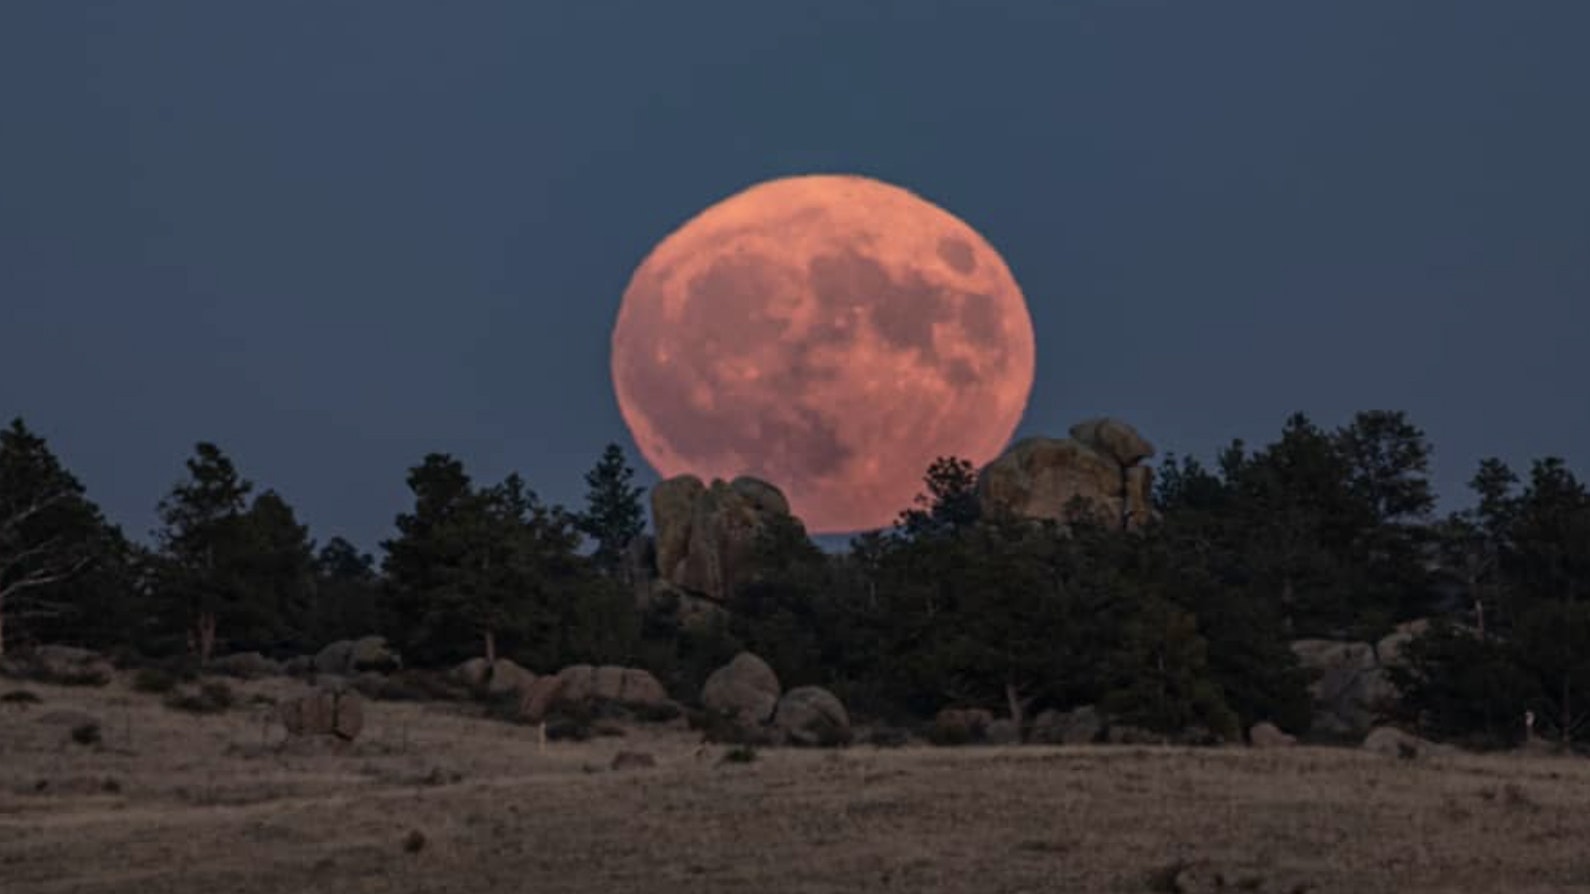 Harvest moon at Curt Gowdy State Park